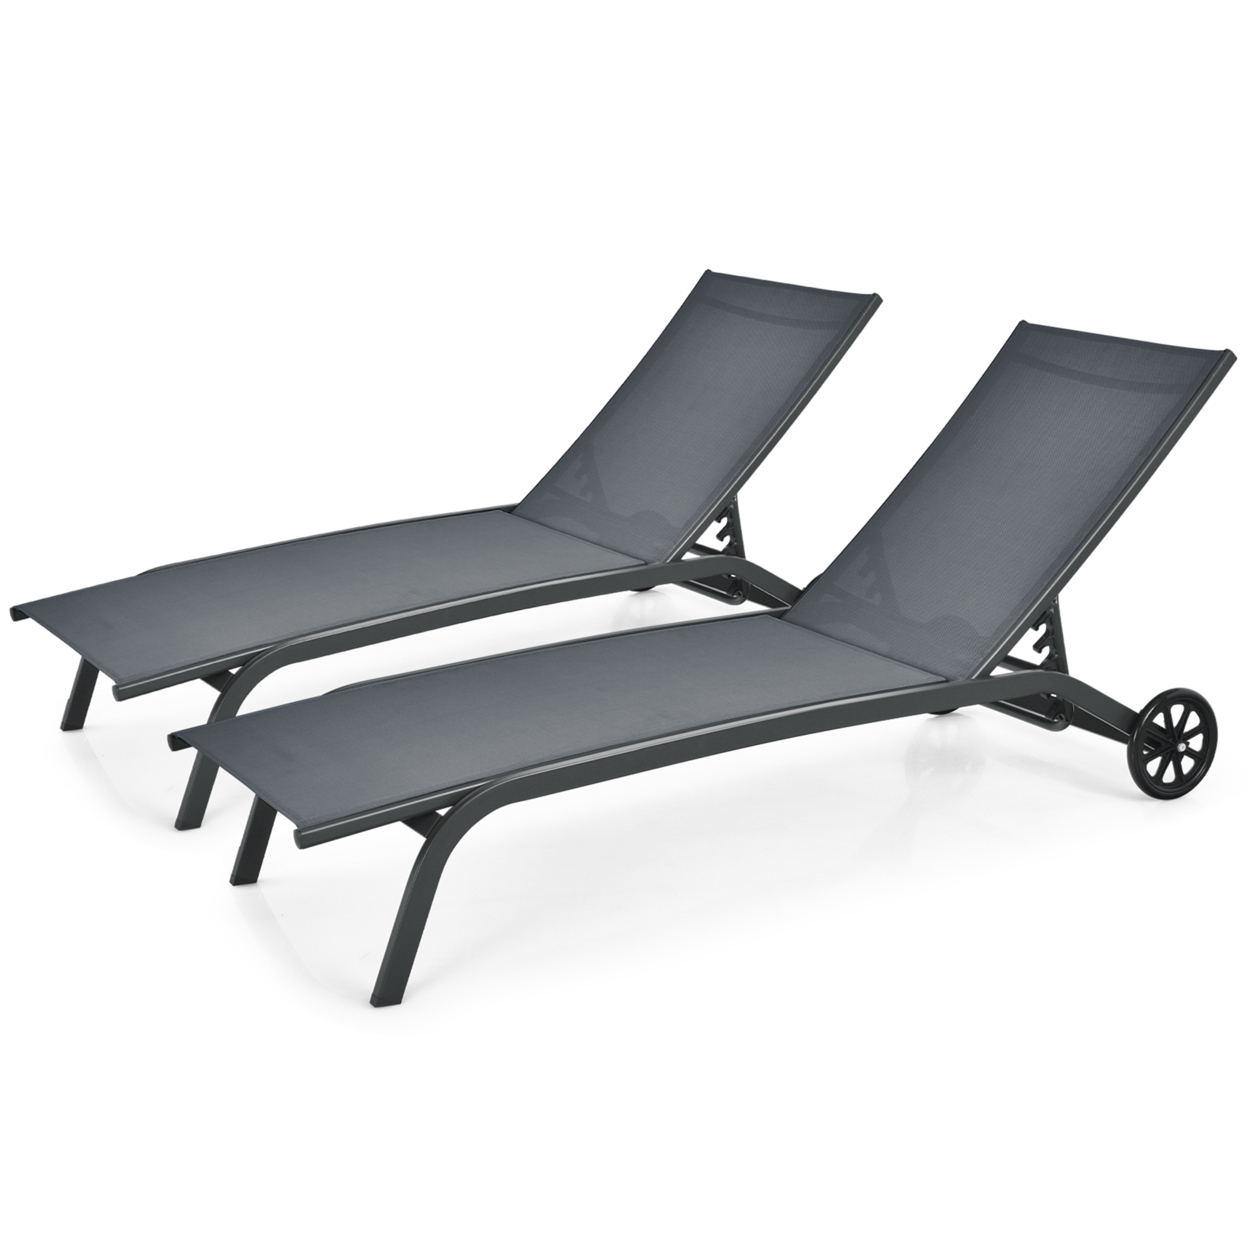 Set Of 2 Outdoor Chaise Lounge Chair Adjustable Patio Recliner W/ Wheels Grey